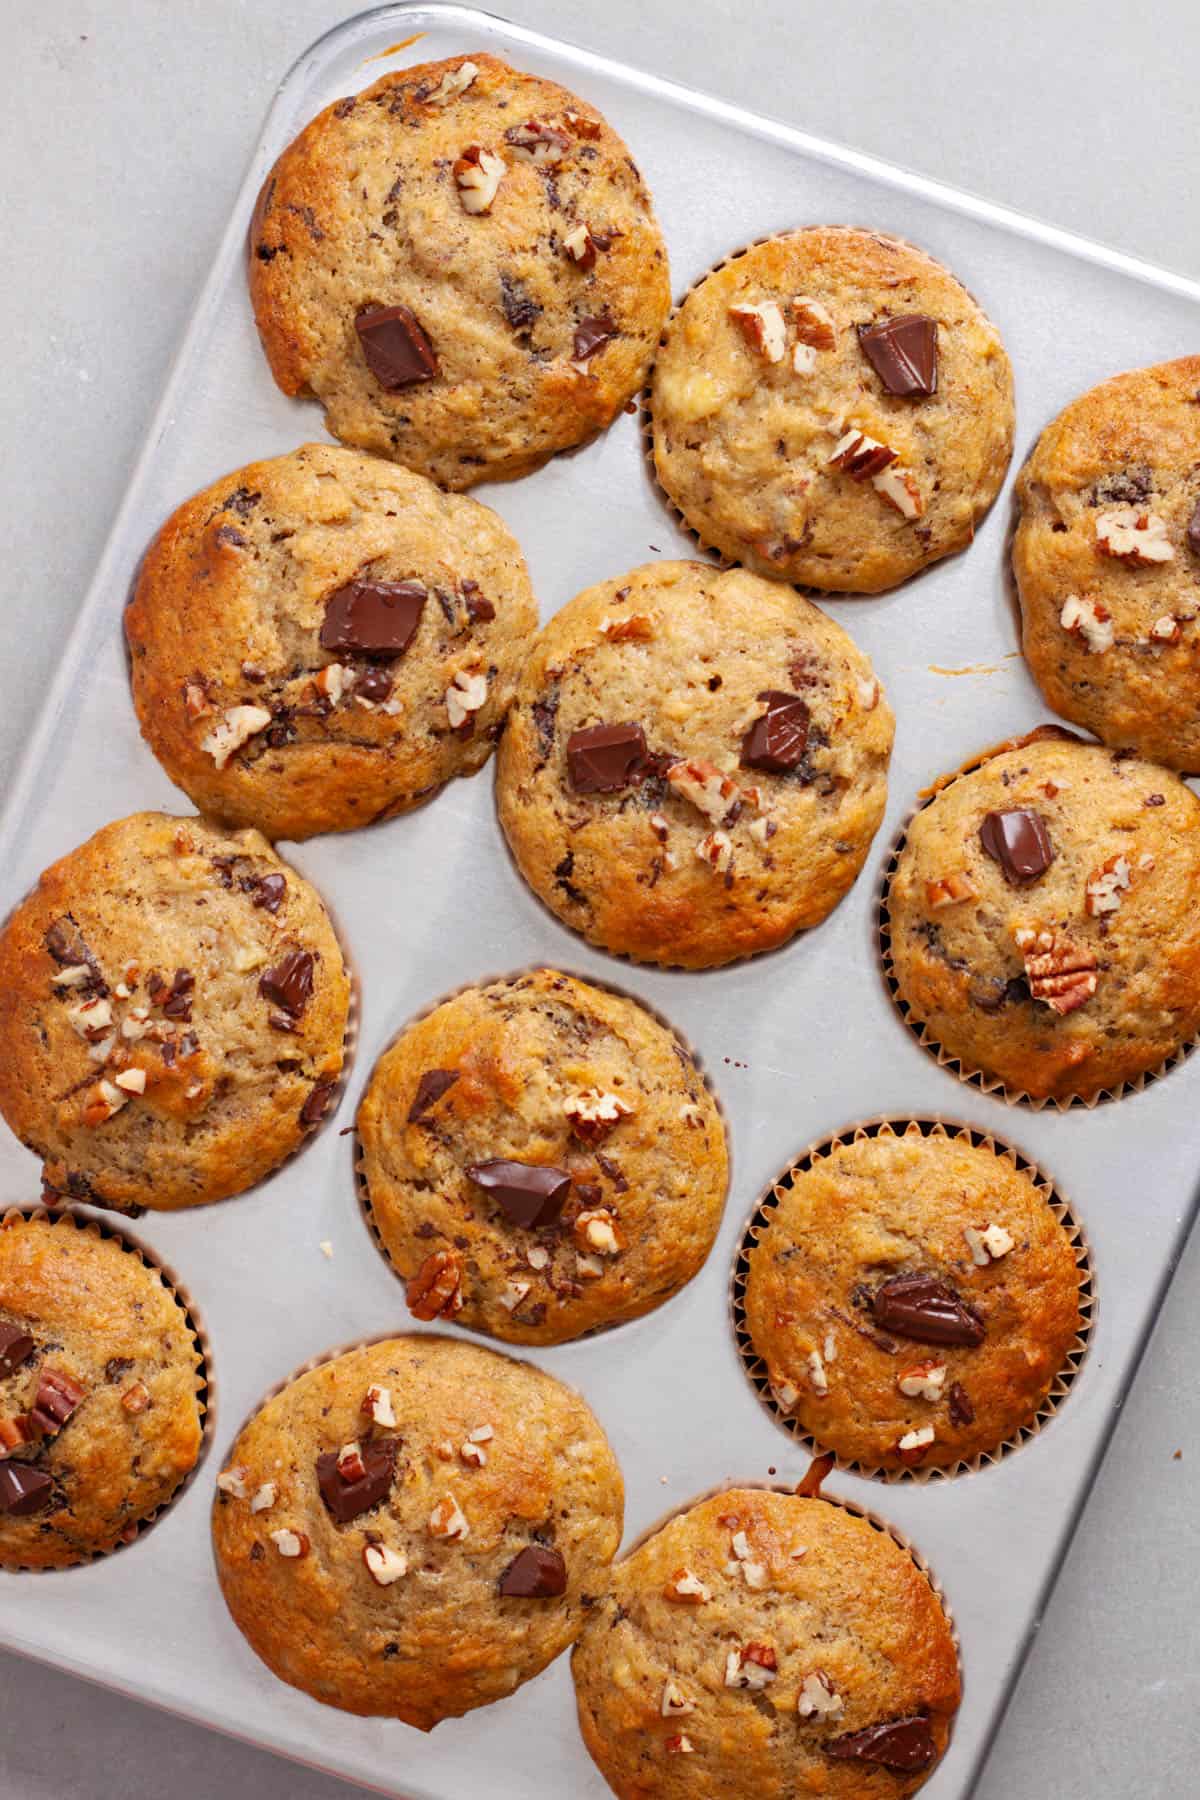 Freshly baked banana chocolate chip muffins in a metal muffin tin on a gray table.